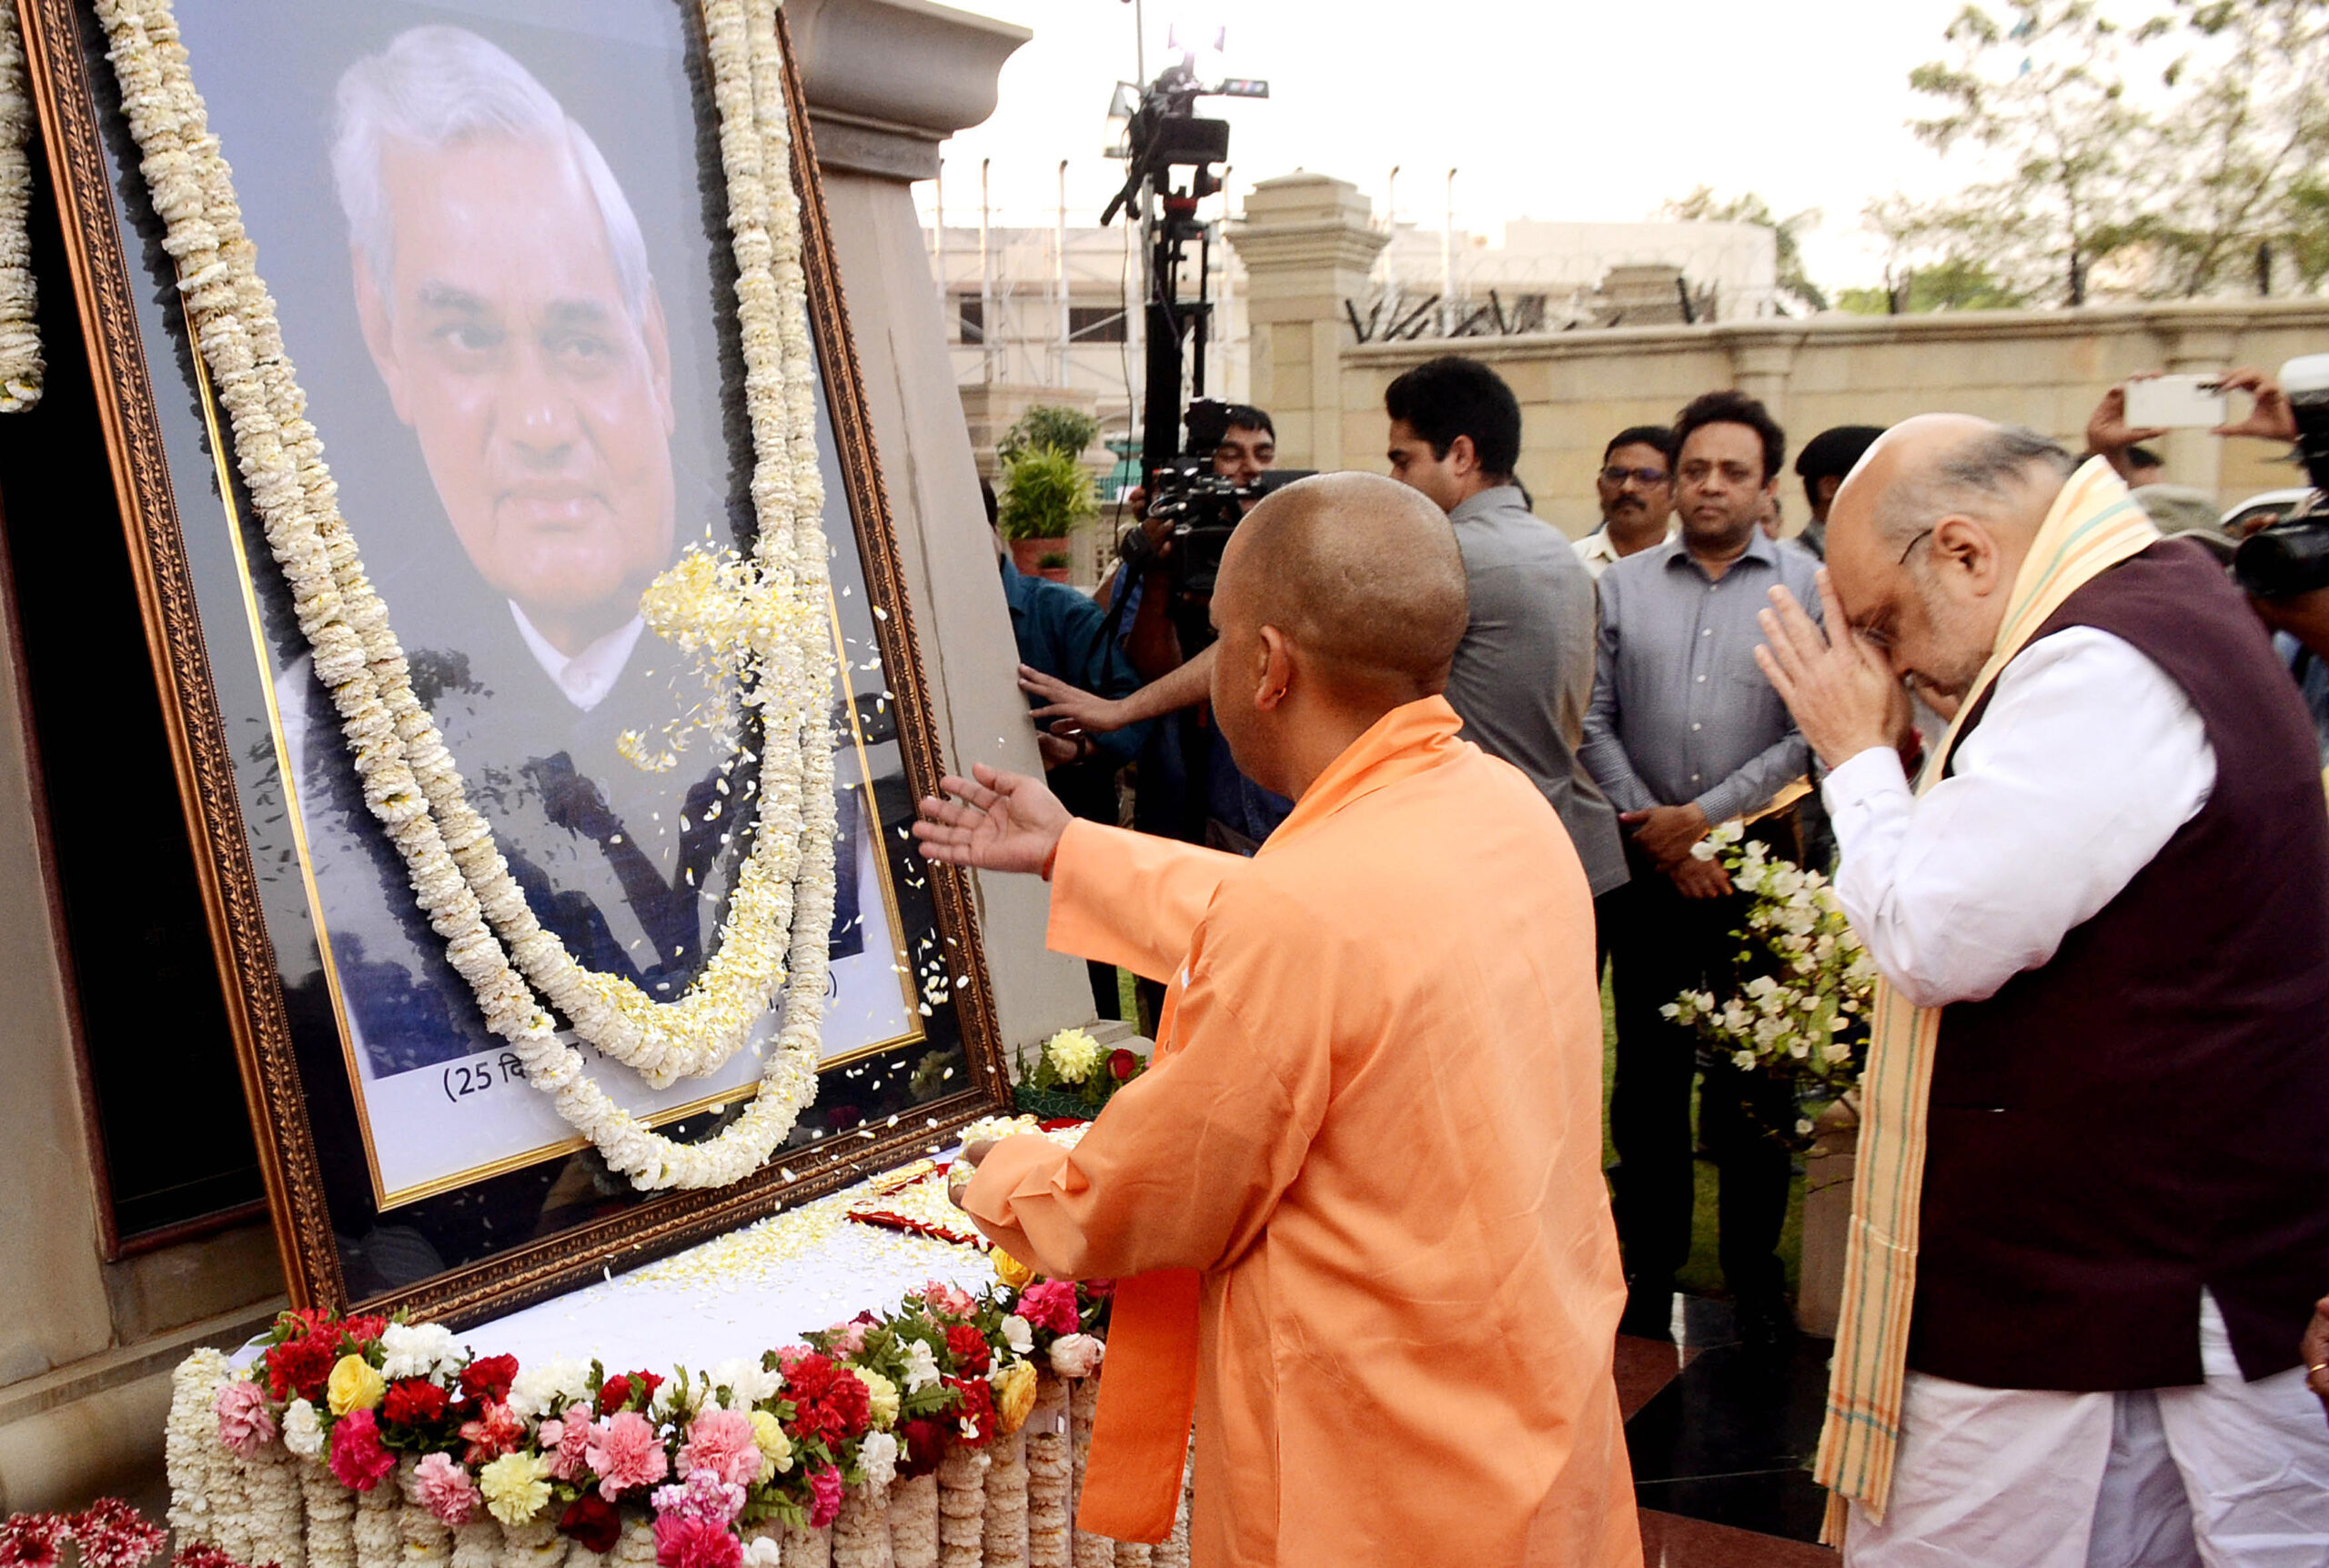 Amit Shah pays tribute to former PM Vajpayee on 5th death anniversary : “Ajatshatru of Indian politics”